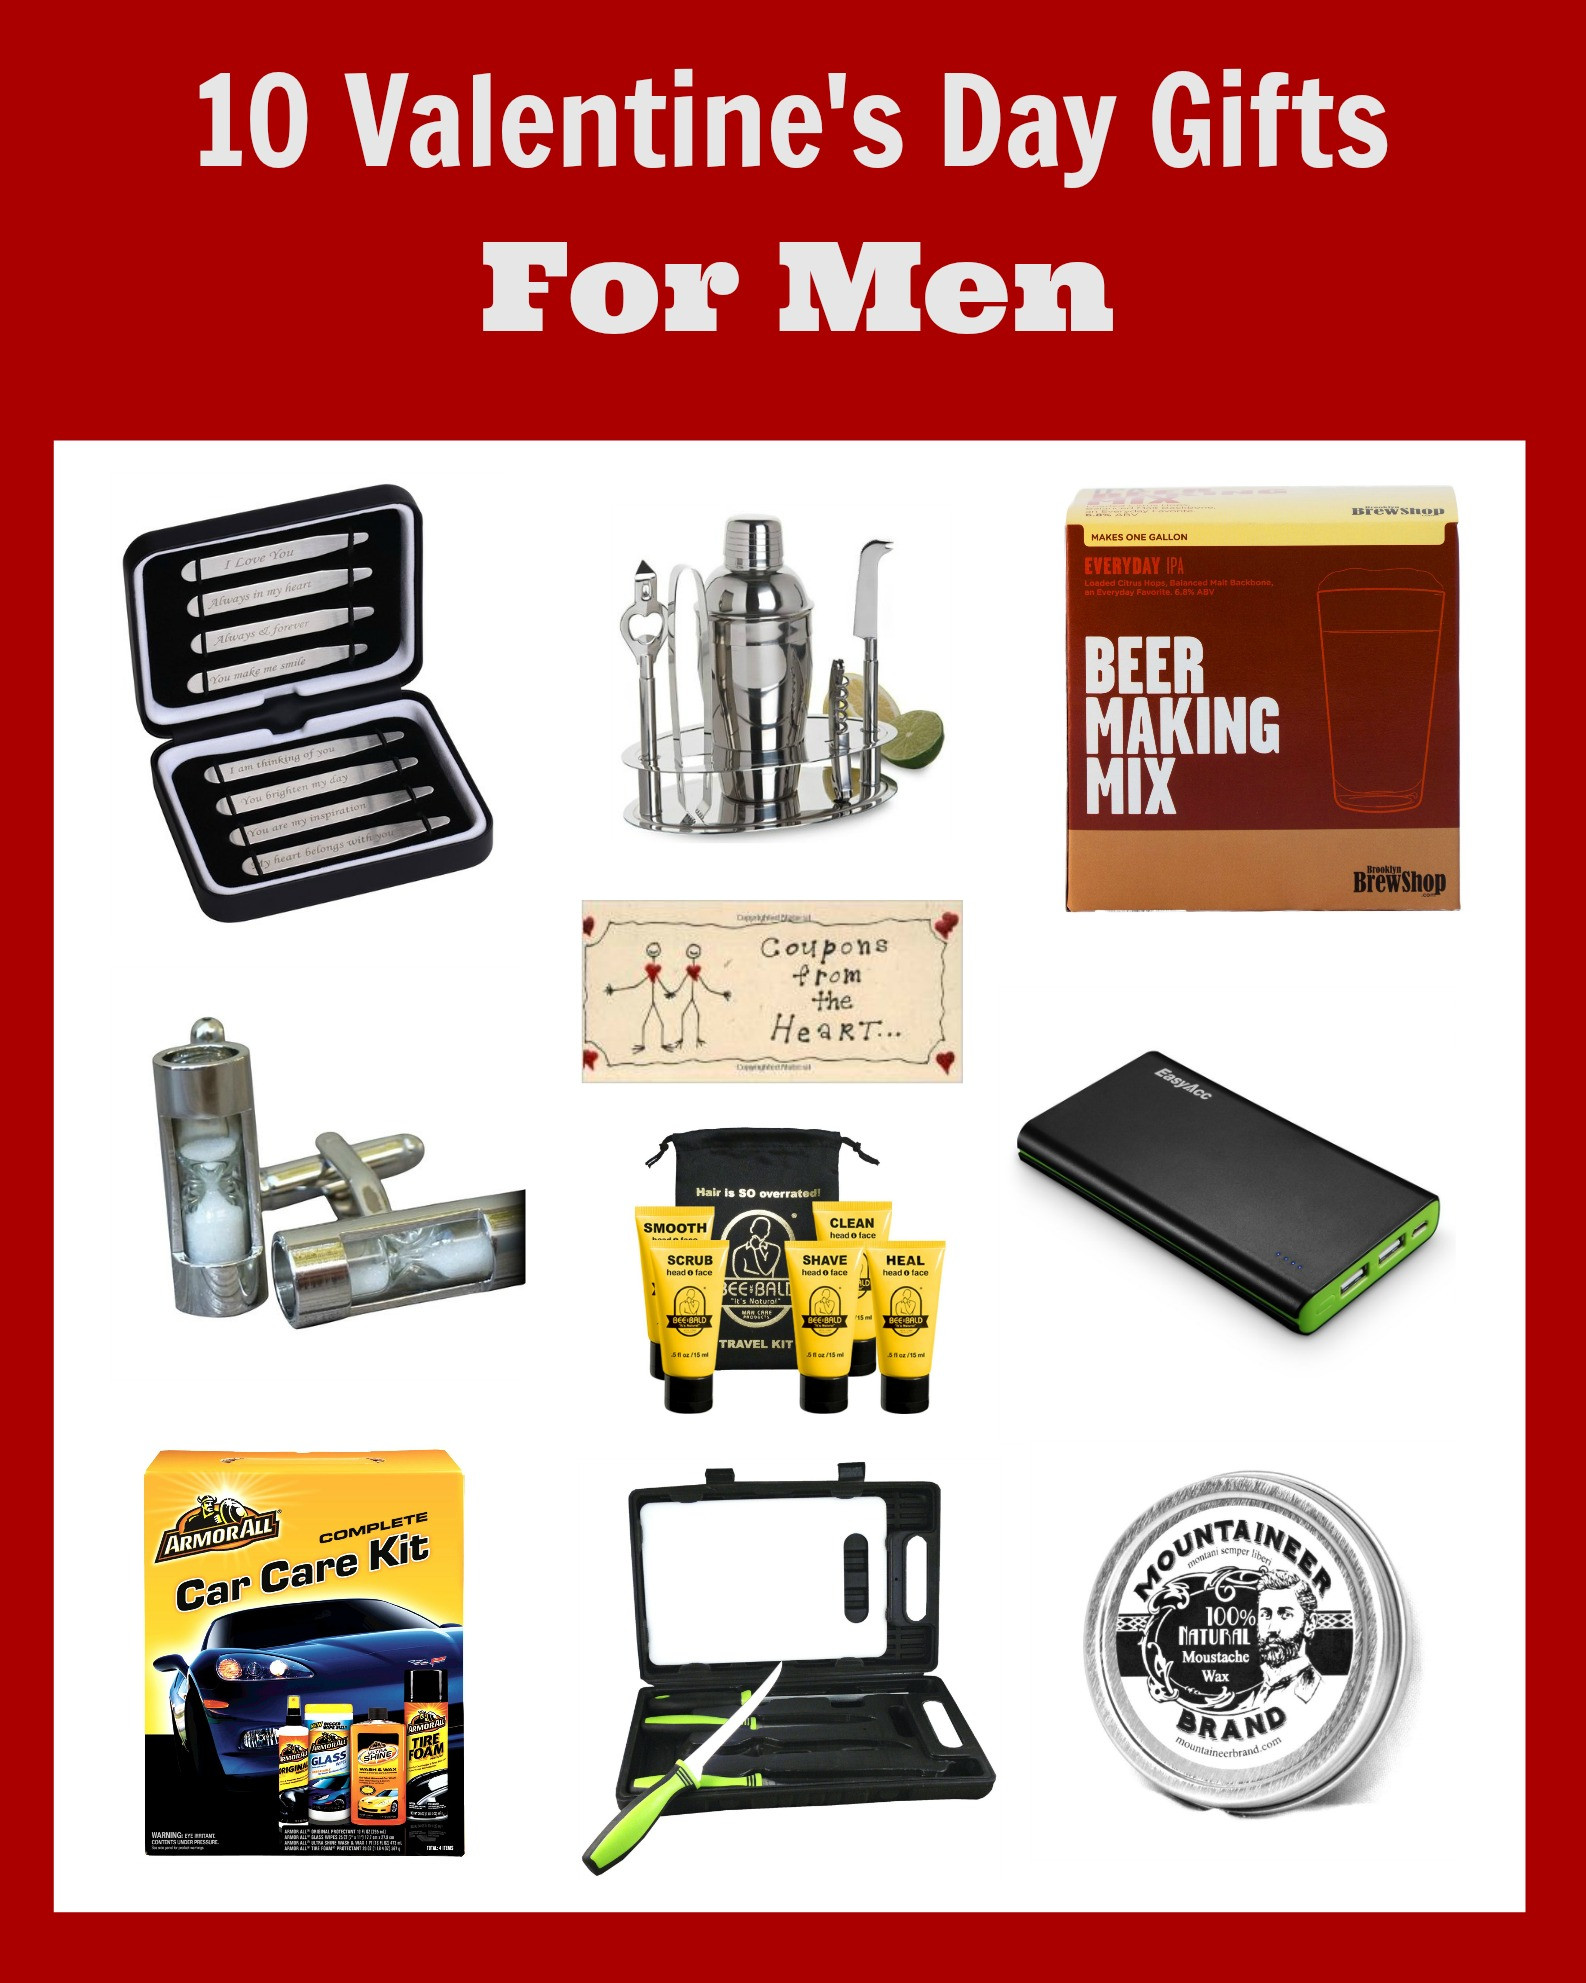 Ideas For Guys Valentines Gift
 Valentine Gifts for Men Ideas They Will Love